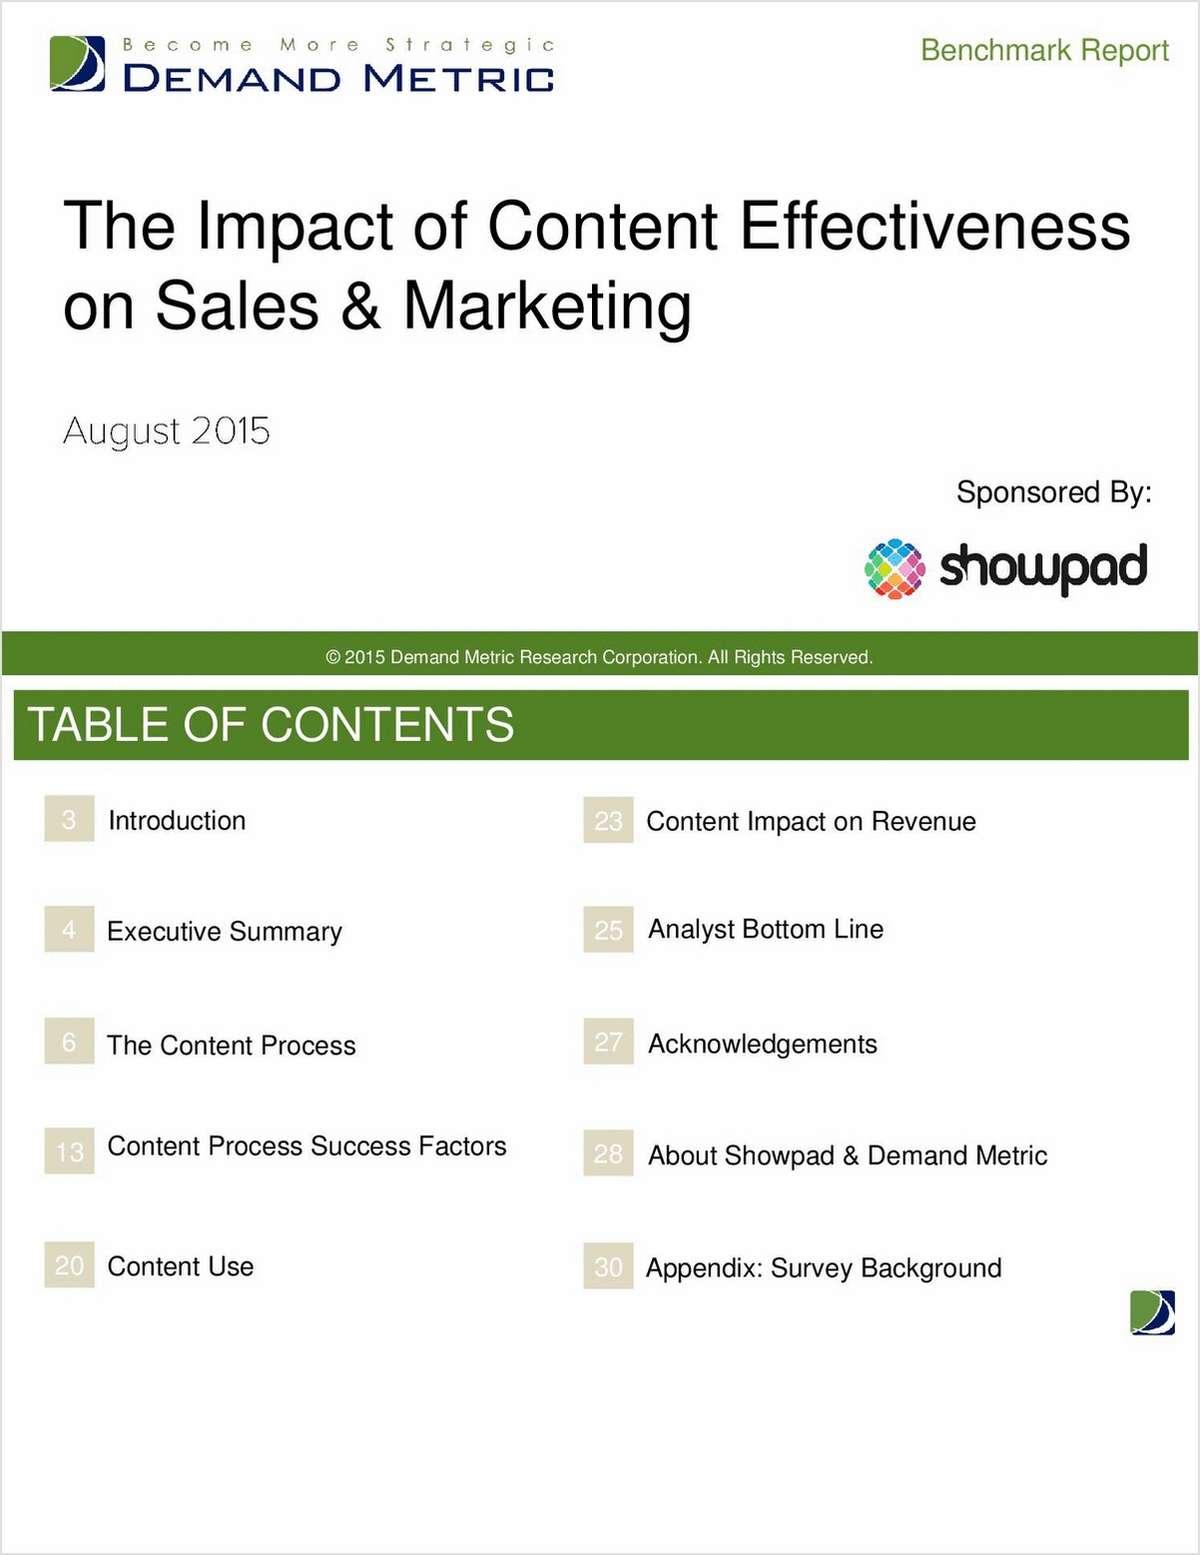 The Impact of Content Effectiveness on Sales and Marketing